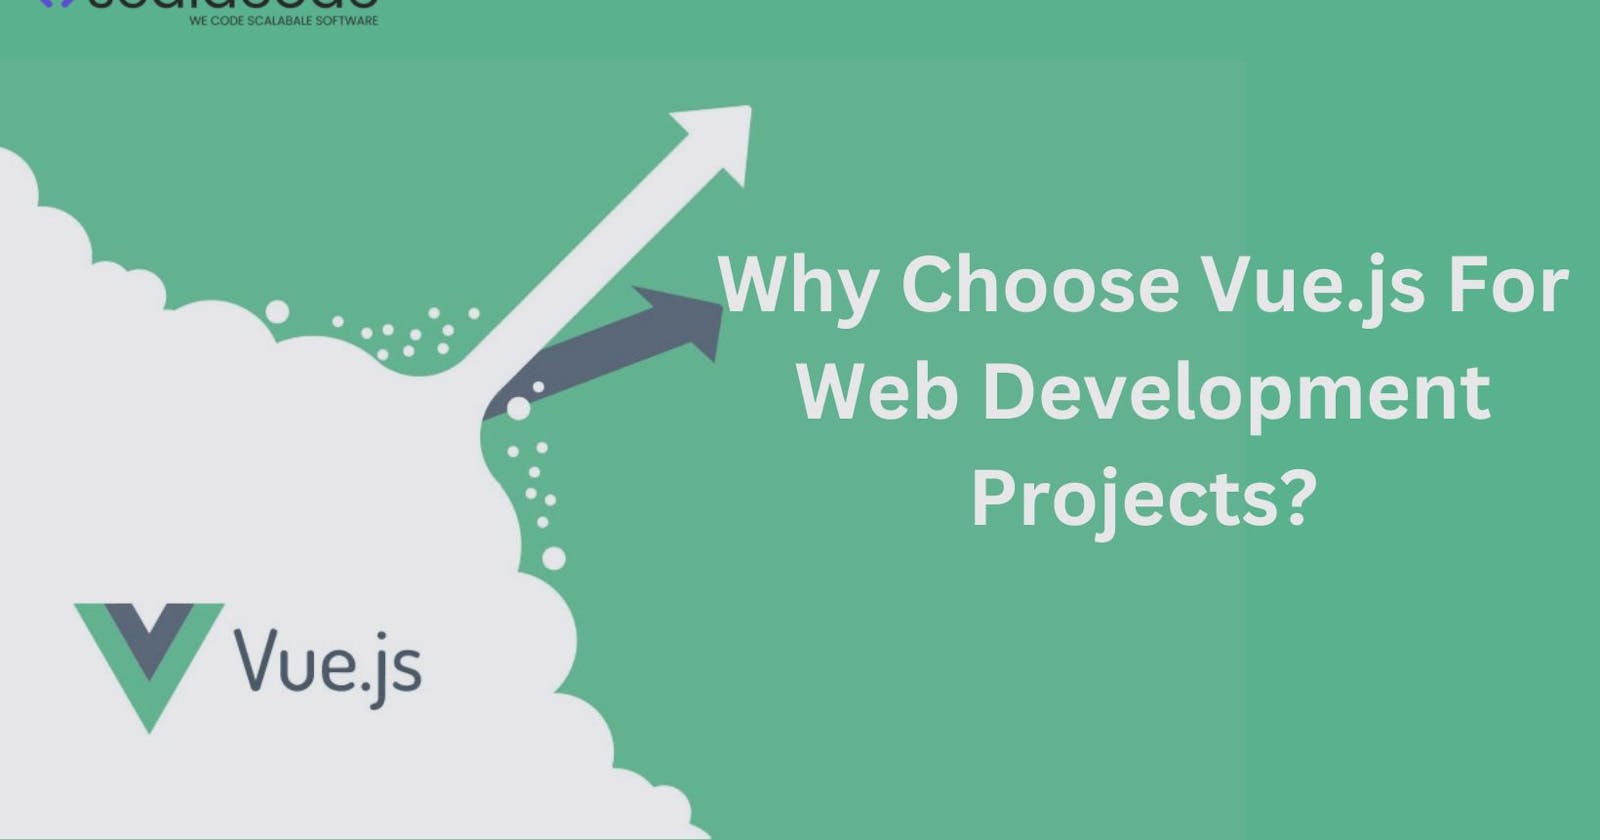 Why Choose Vue.js For Web Development Projects?